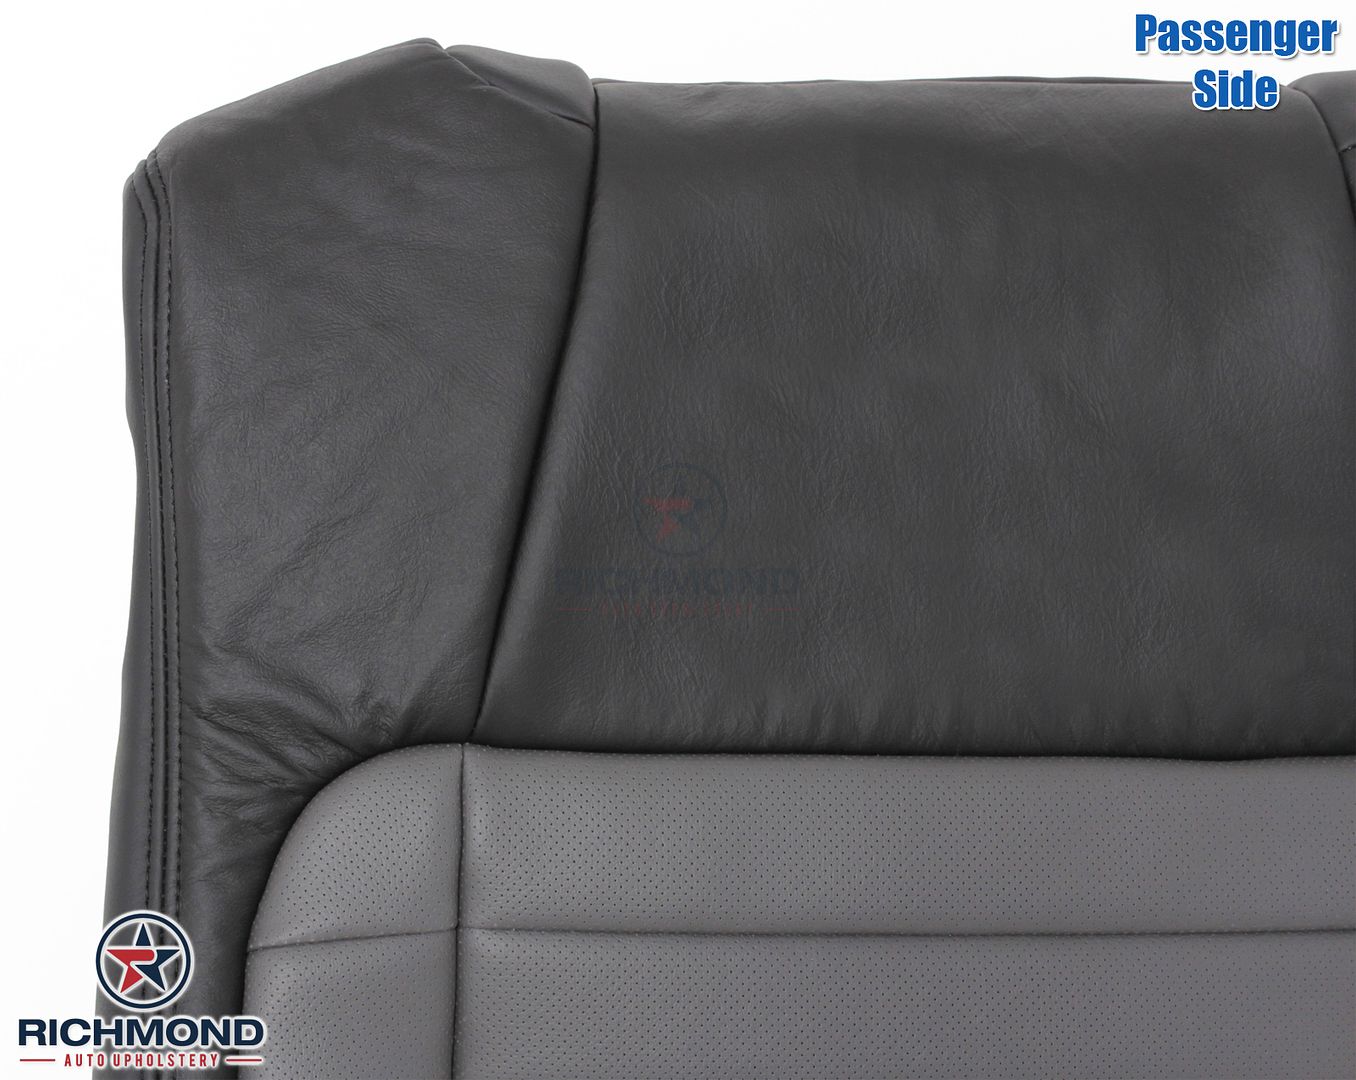  photo 2001-2002-Ford-F150-F-150-Harley-
Davidson-Passenger-Side-LeanBack-Lean-Back-Replacement-Leather-Seat-Cover-4_zpsnvhu8lpd.jpg